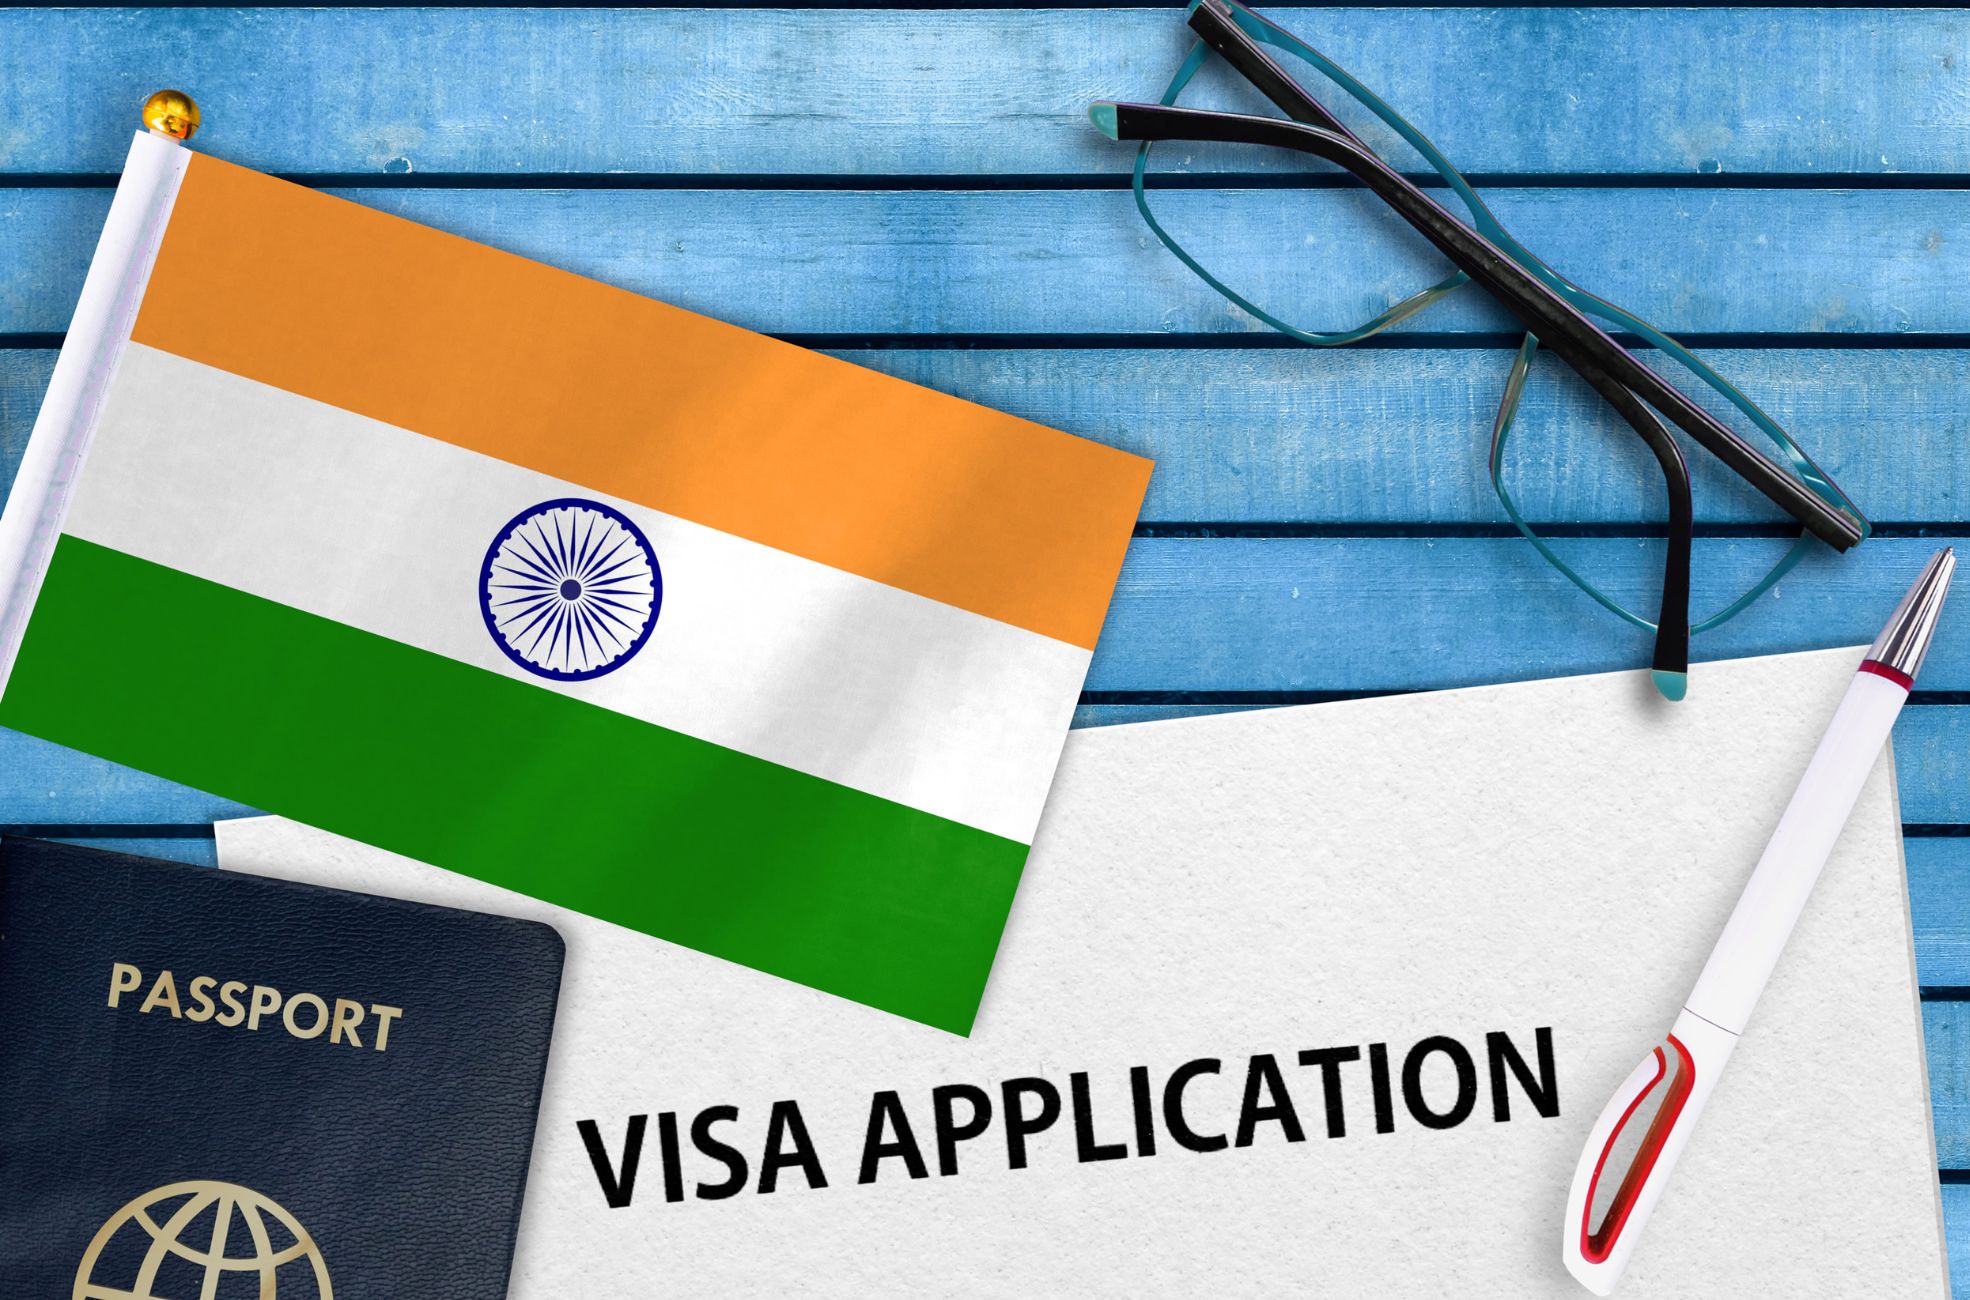 Stock Photo Of Indian Passport For Visa-Free Travel to Other Countries